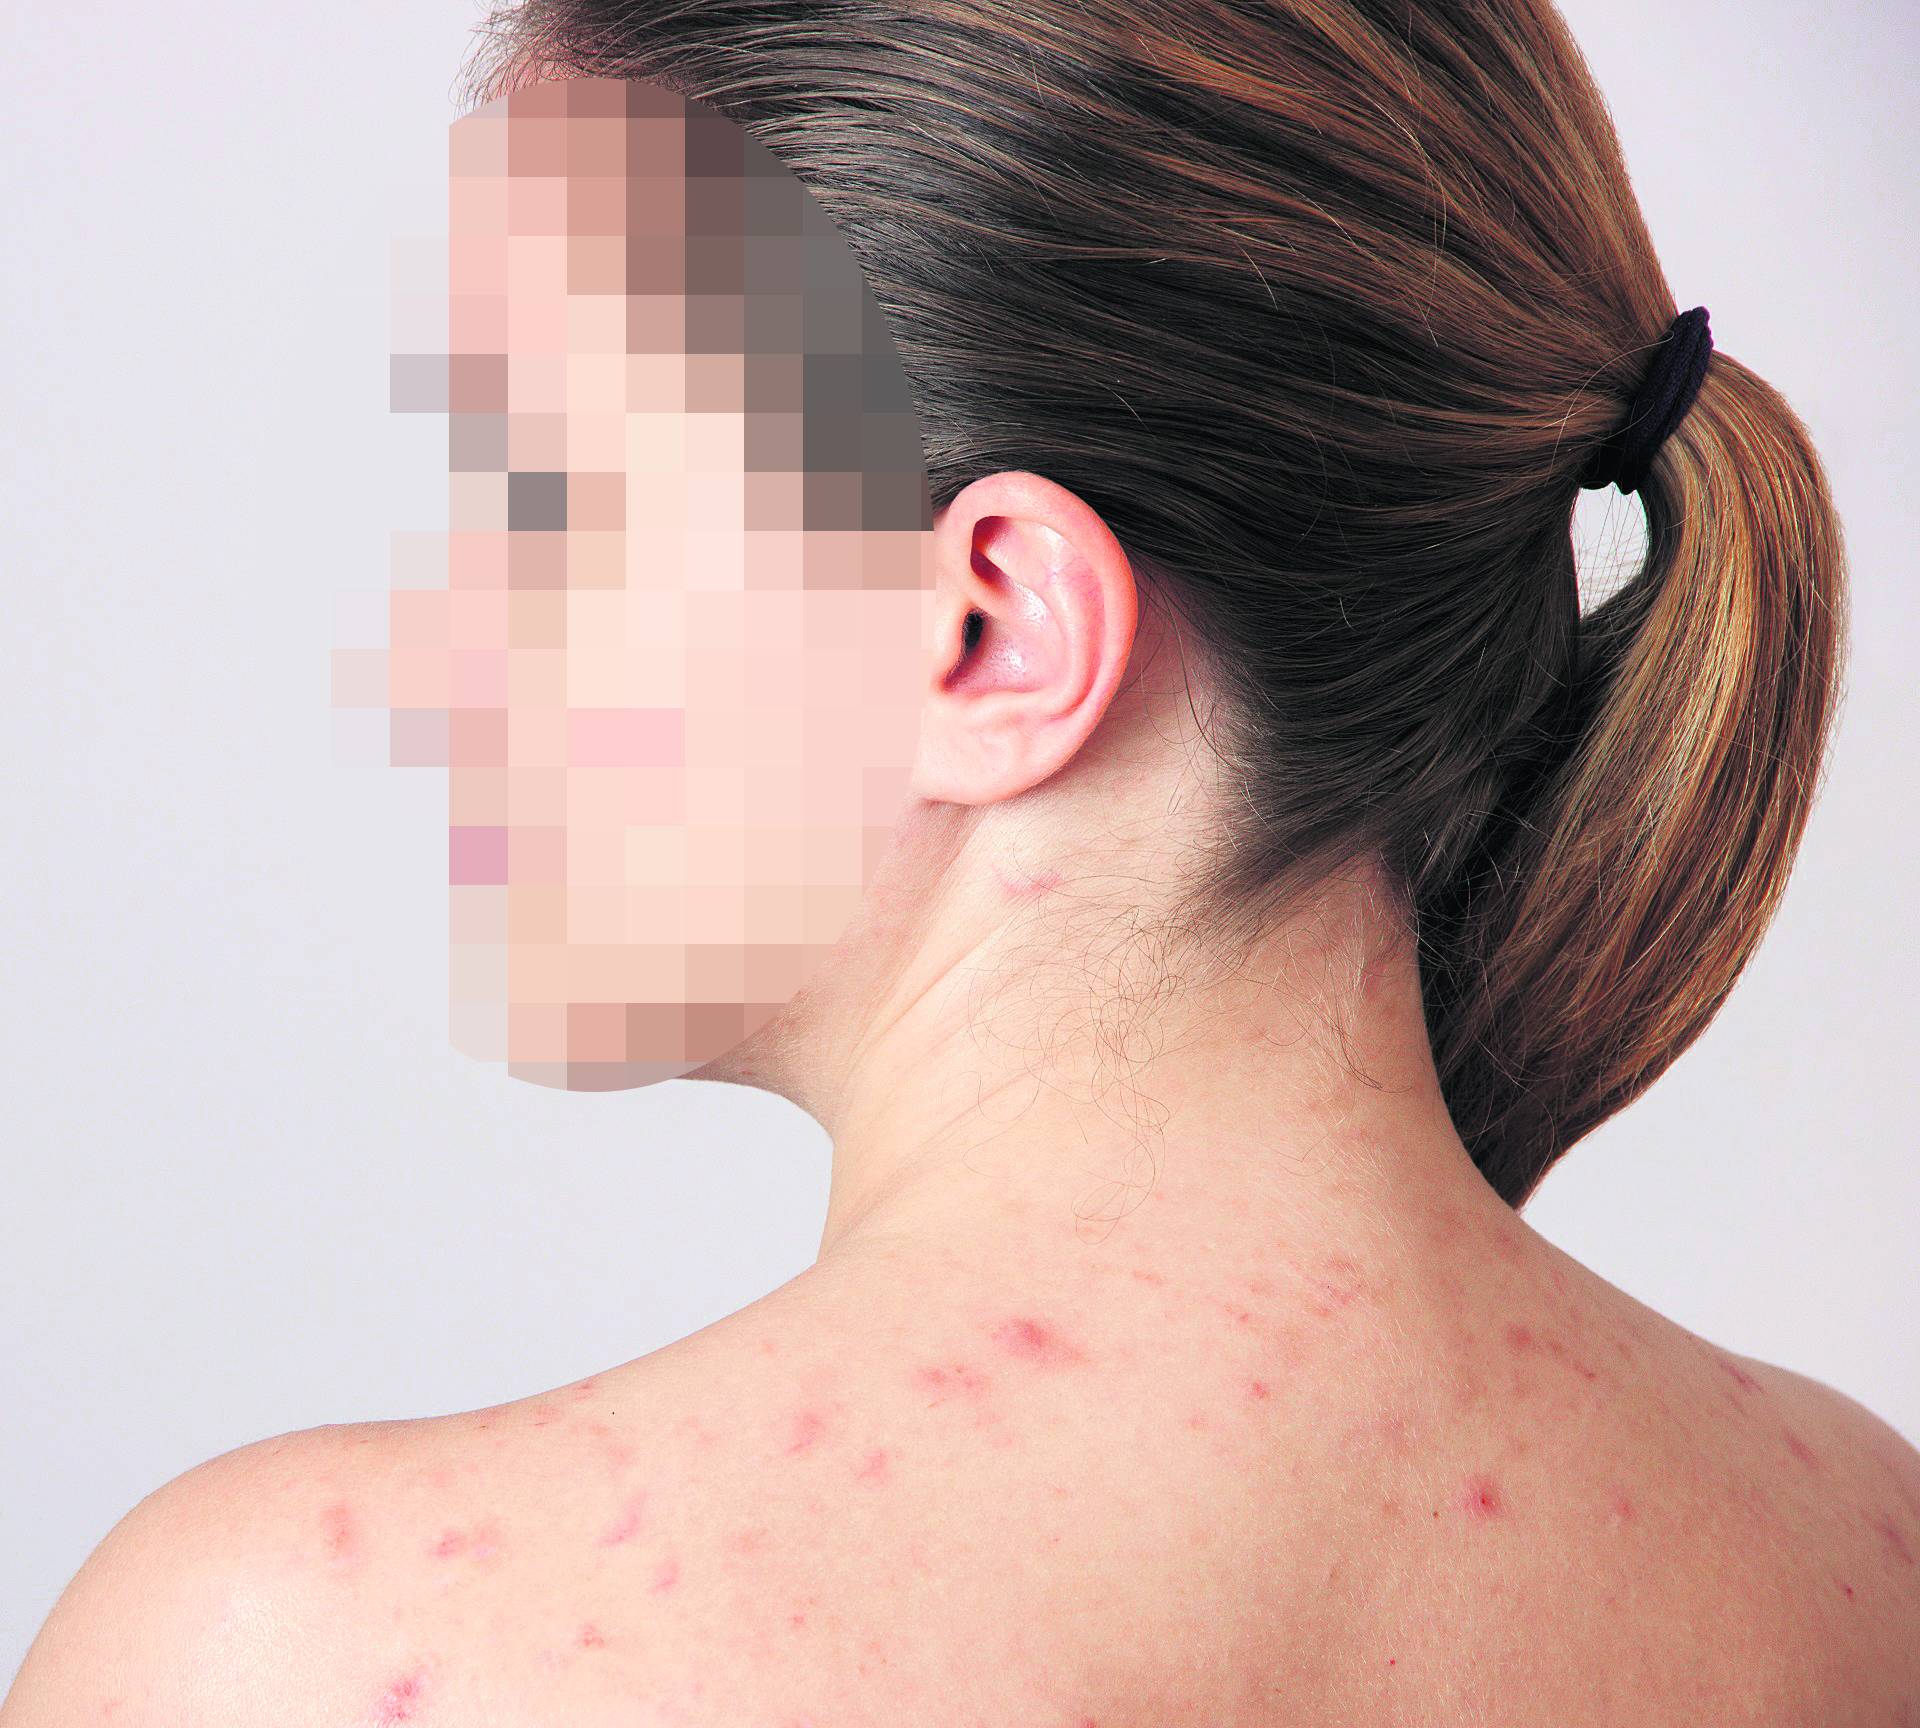 Beautiful young girl with acne on his face and the back on a whi